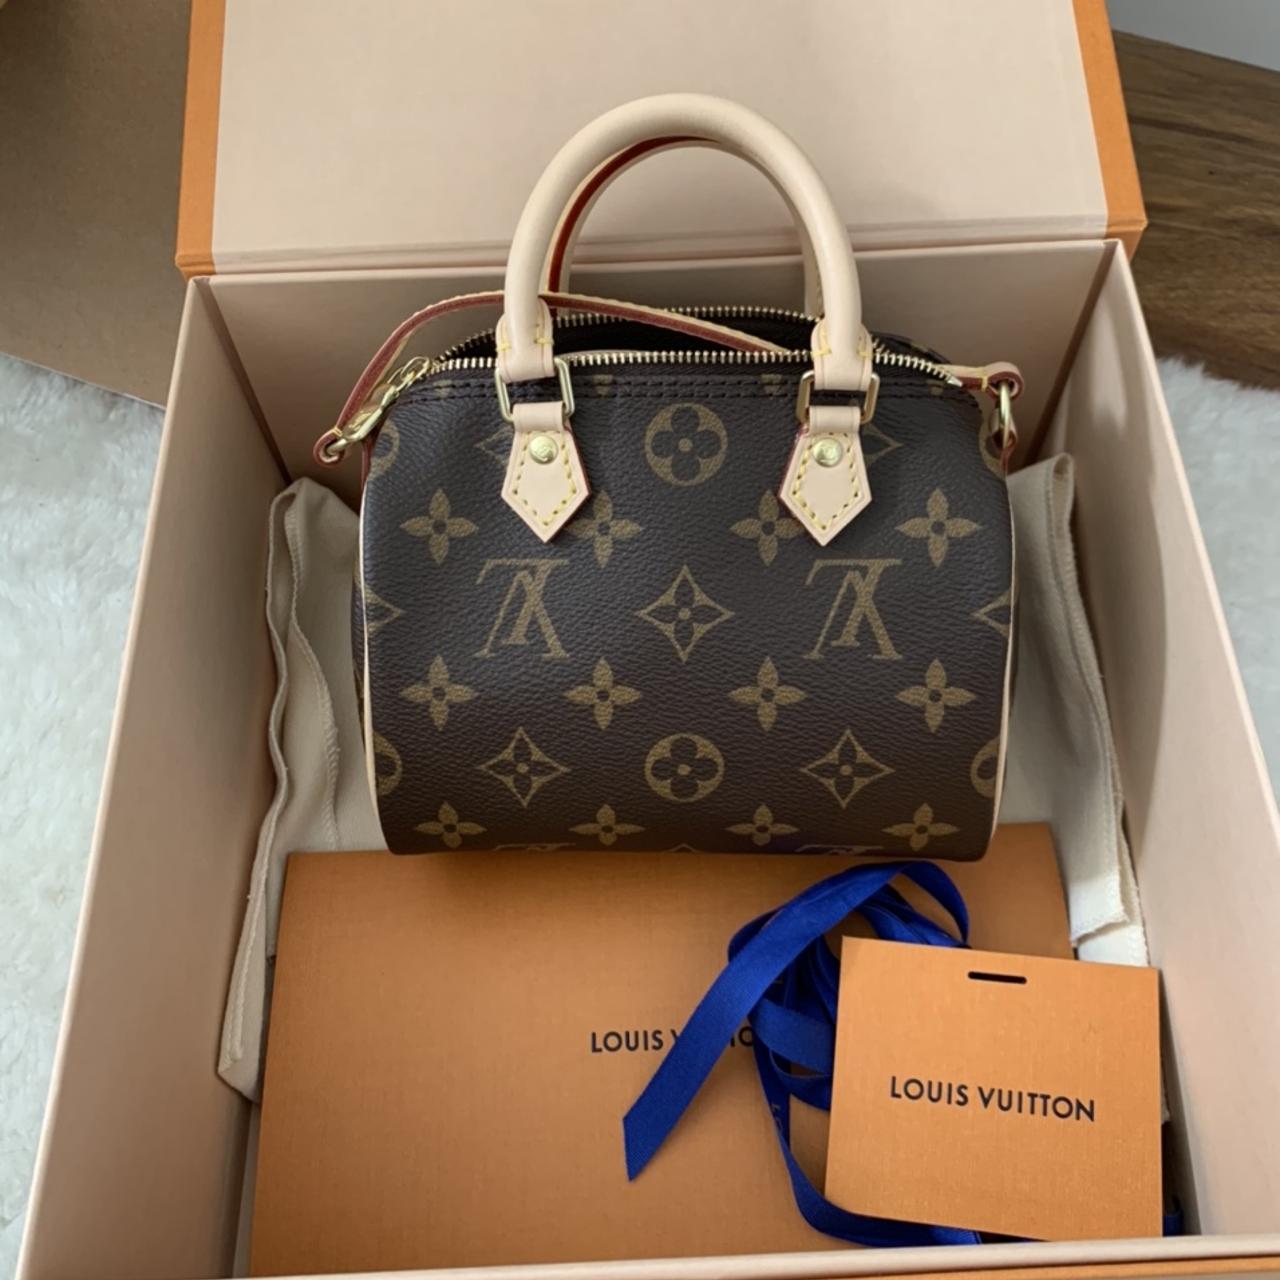 LV wallet Have receipt and tags that came with it - Depop